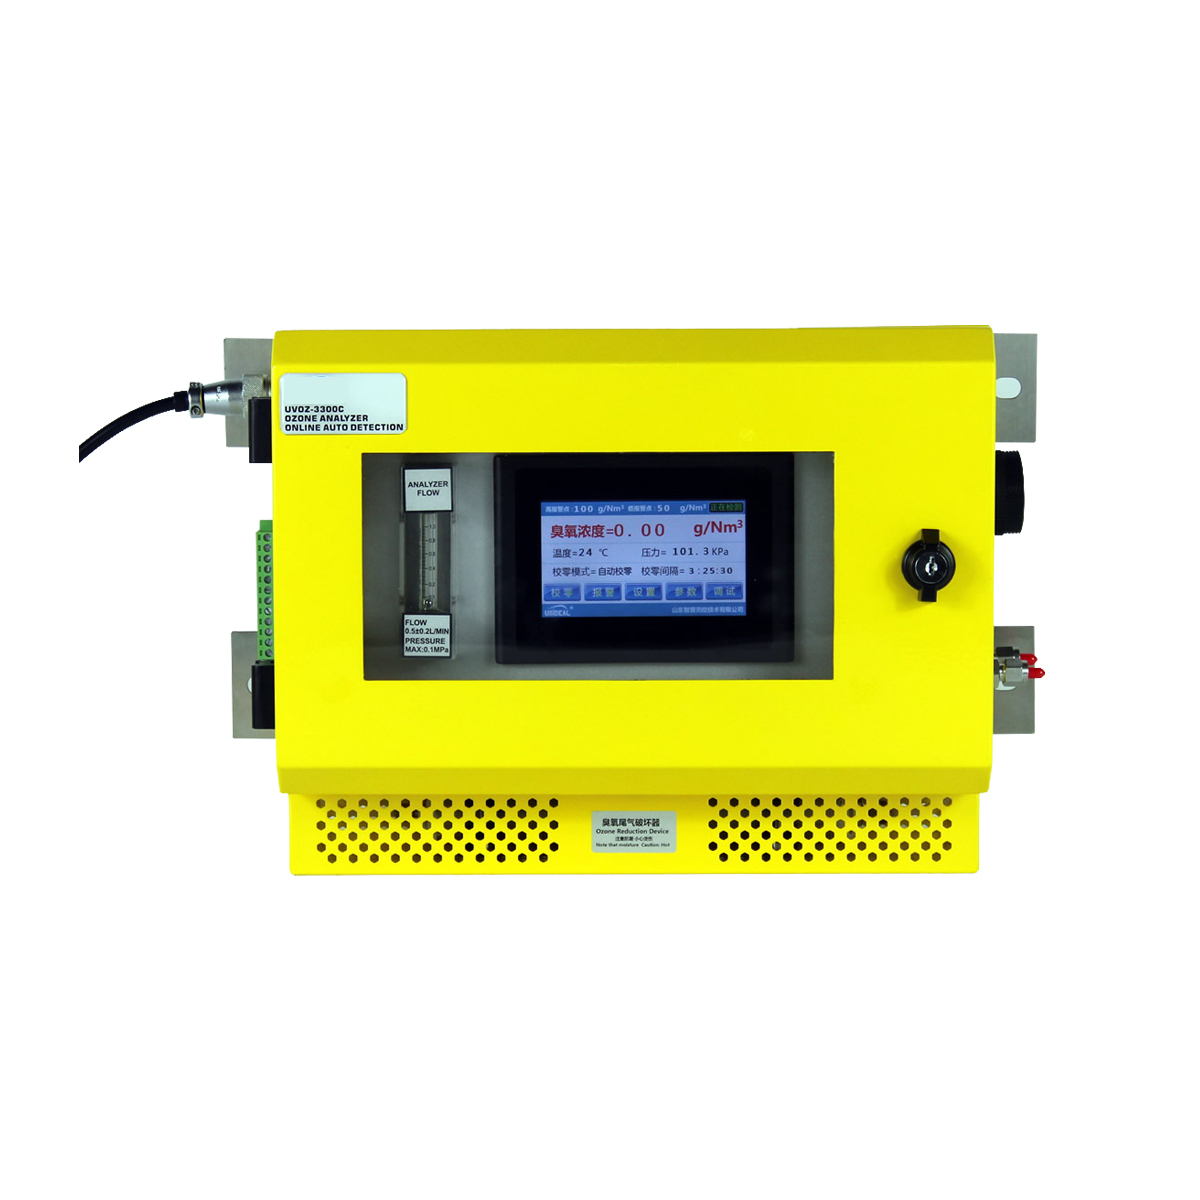 UVOZ-3300C Wall-mounted Ozone Gas Concentration Analyser